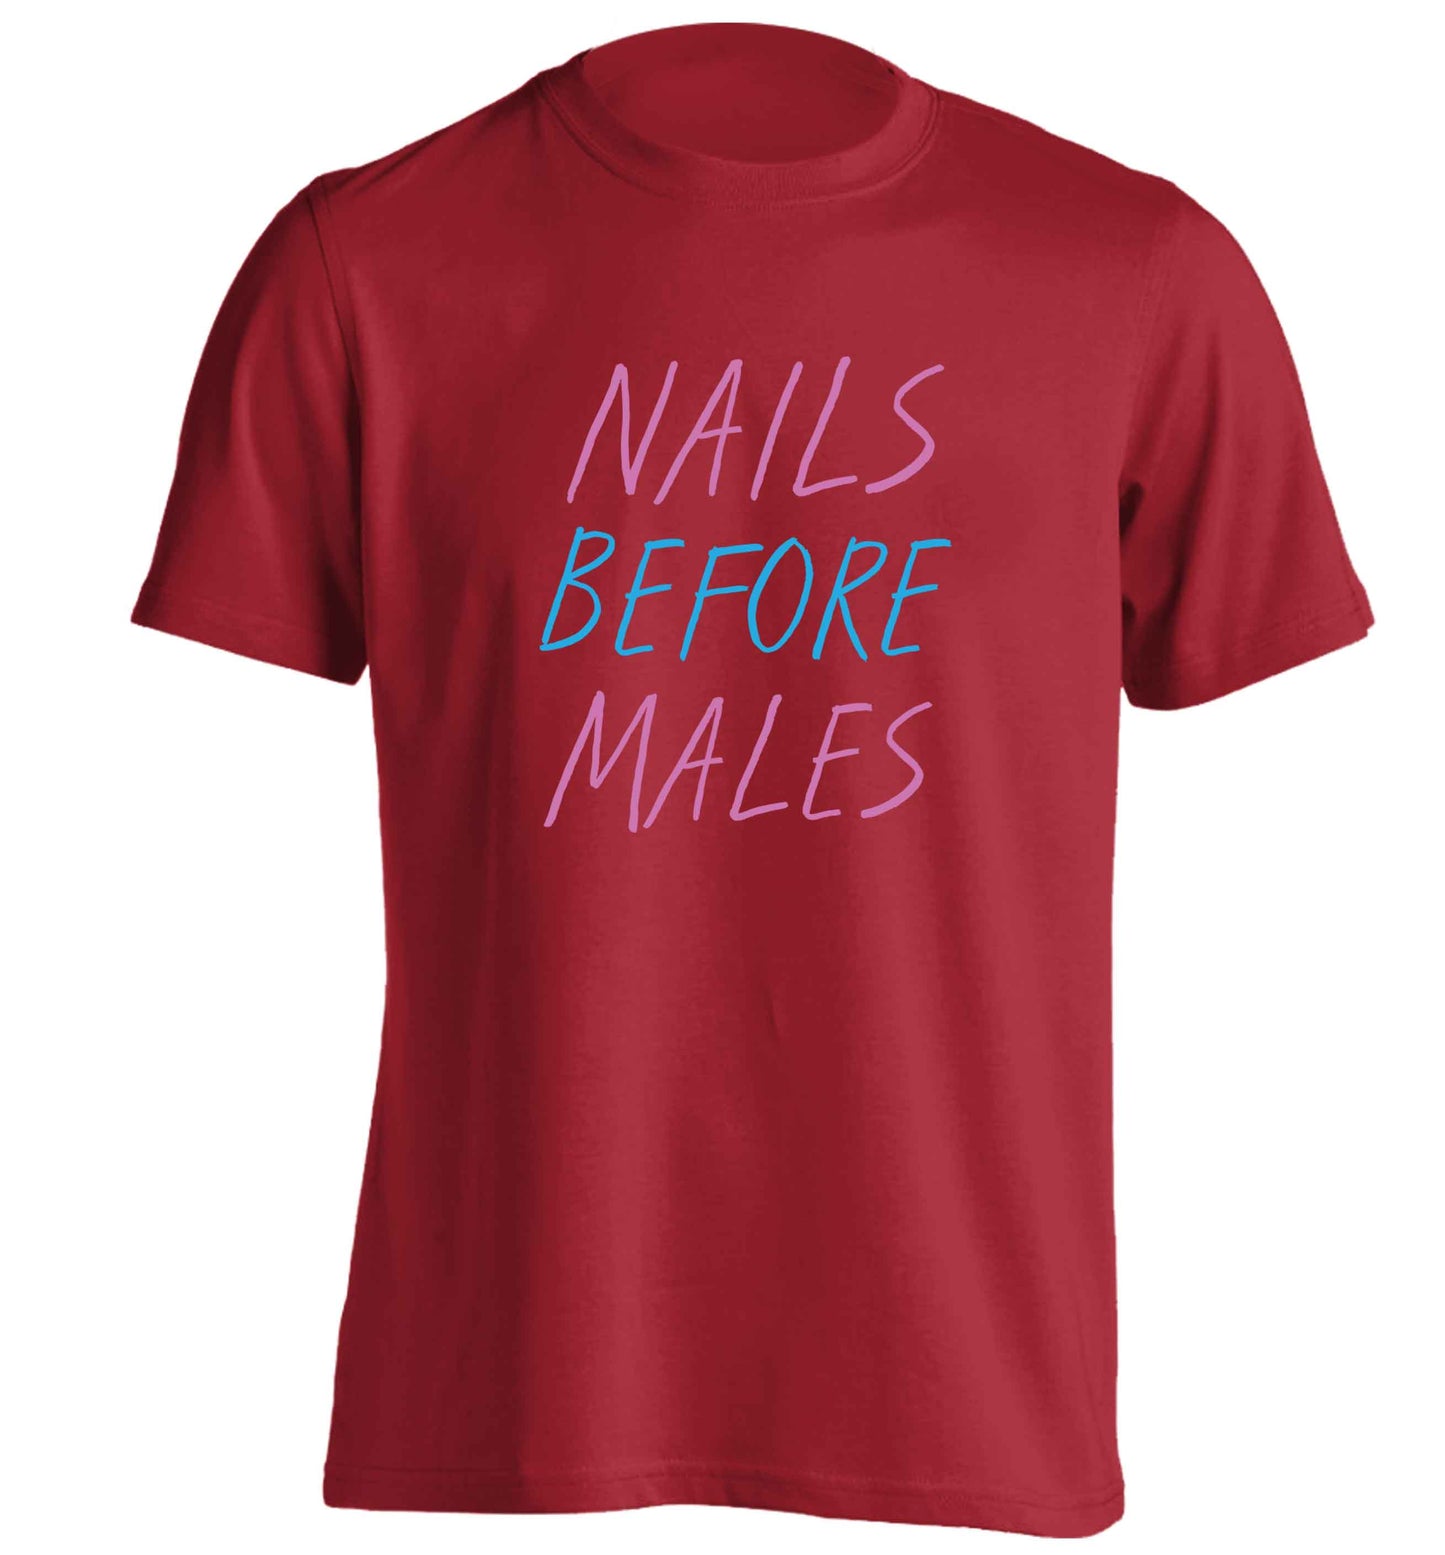 Nails before males adults unisex red Tshirt 2XL